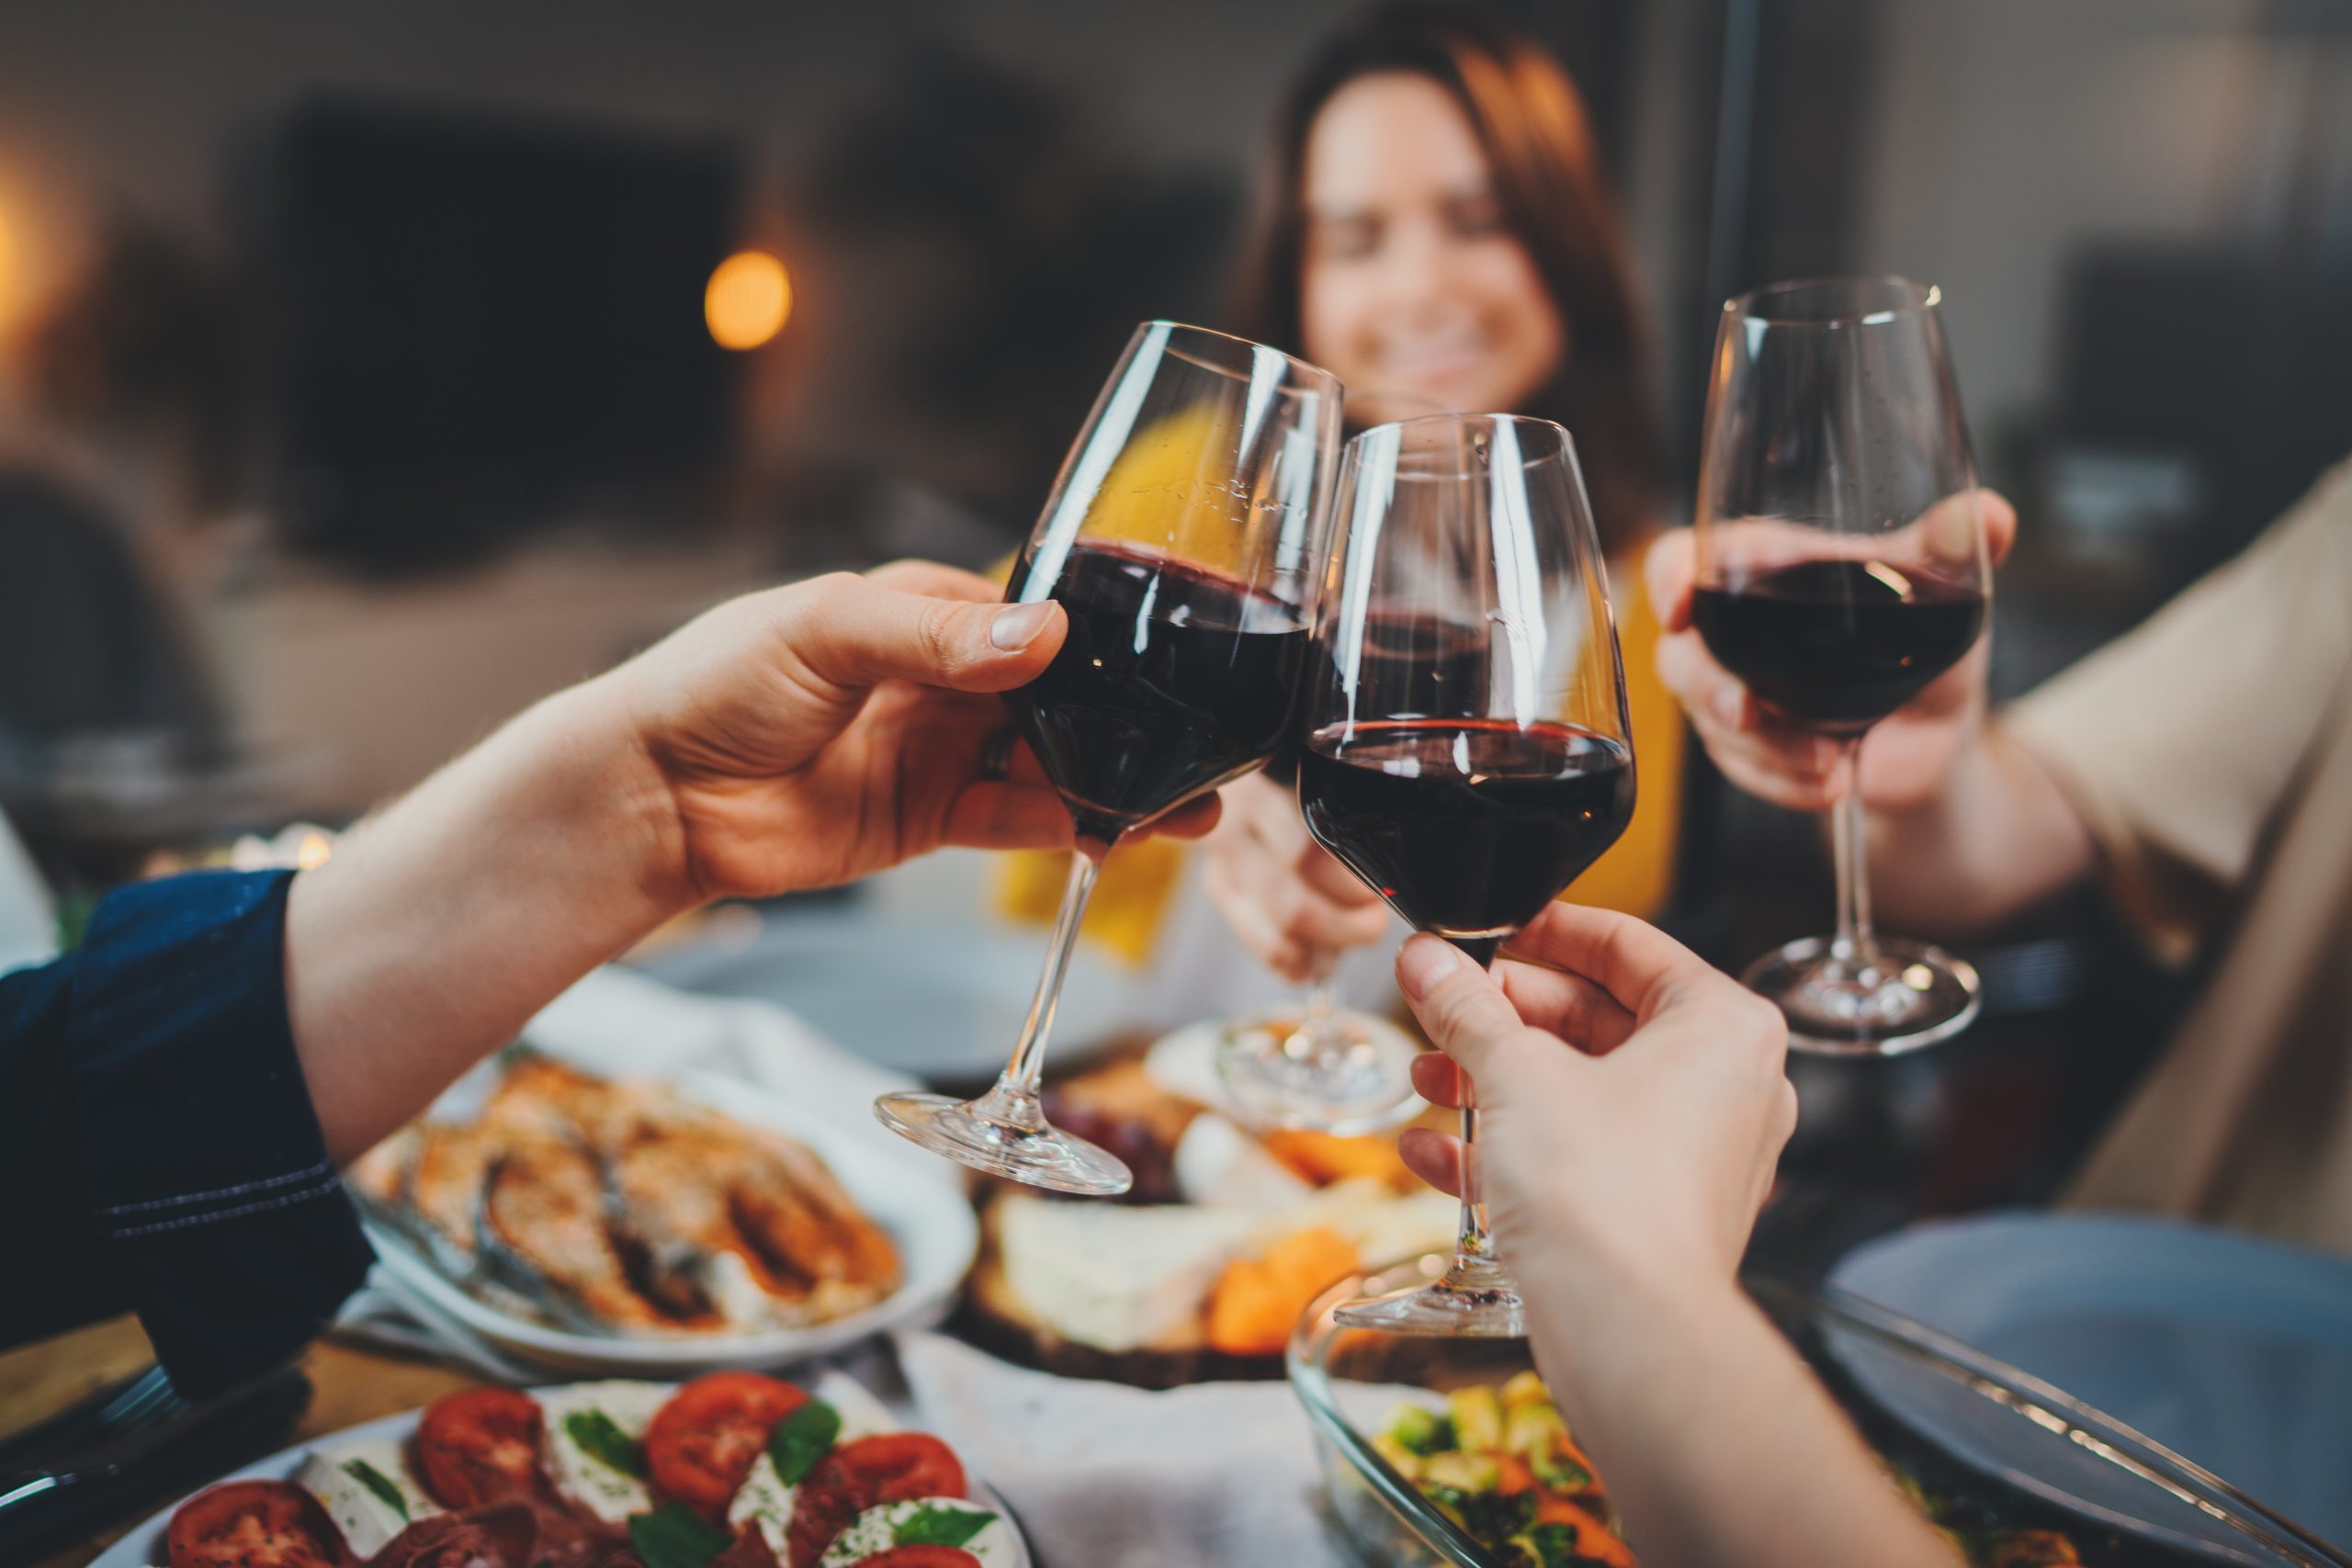 Group of people celebrating anniversary at home, cozy atmosphere, family dining at restaurant with healthy food making cheers with wine glasses, Togetherness Friendship Traditional concept